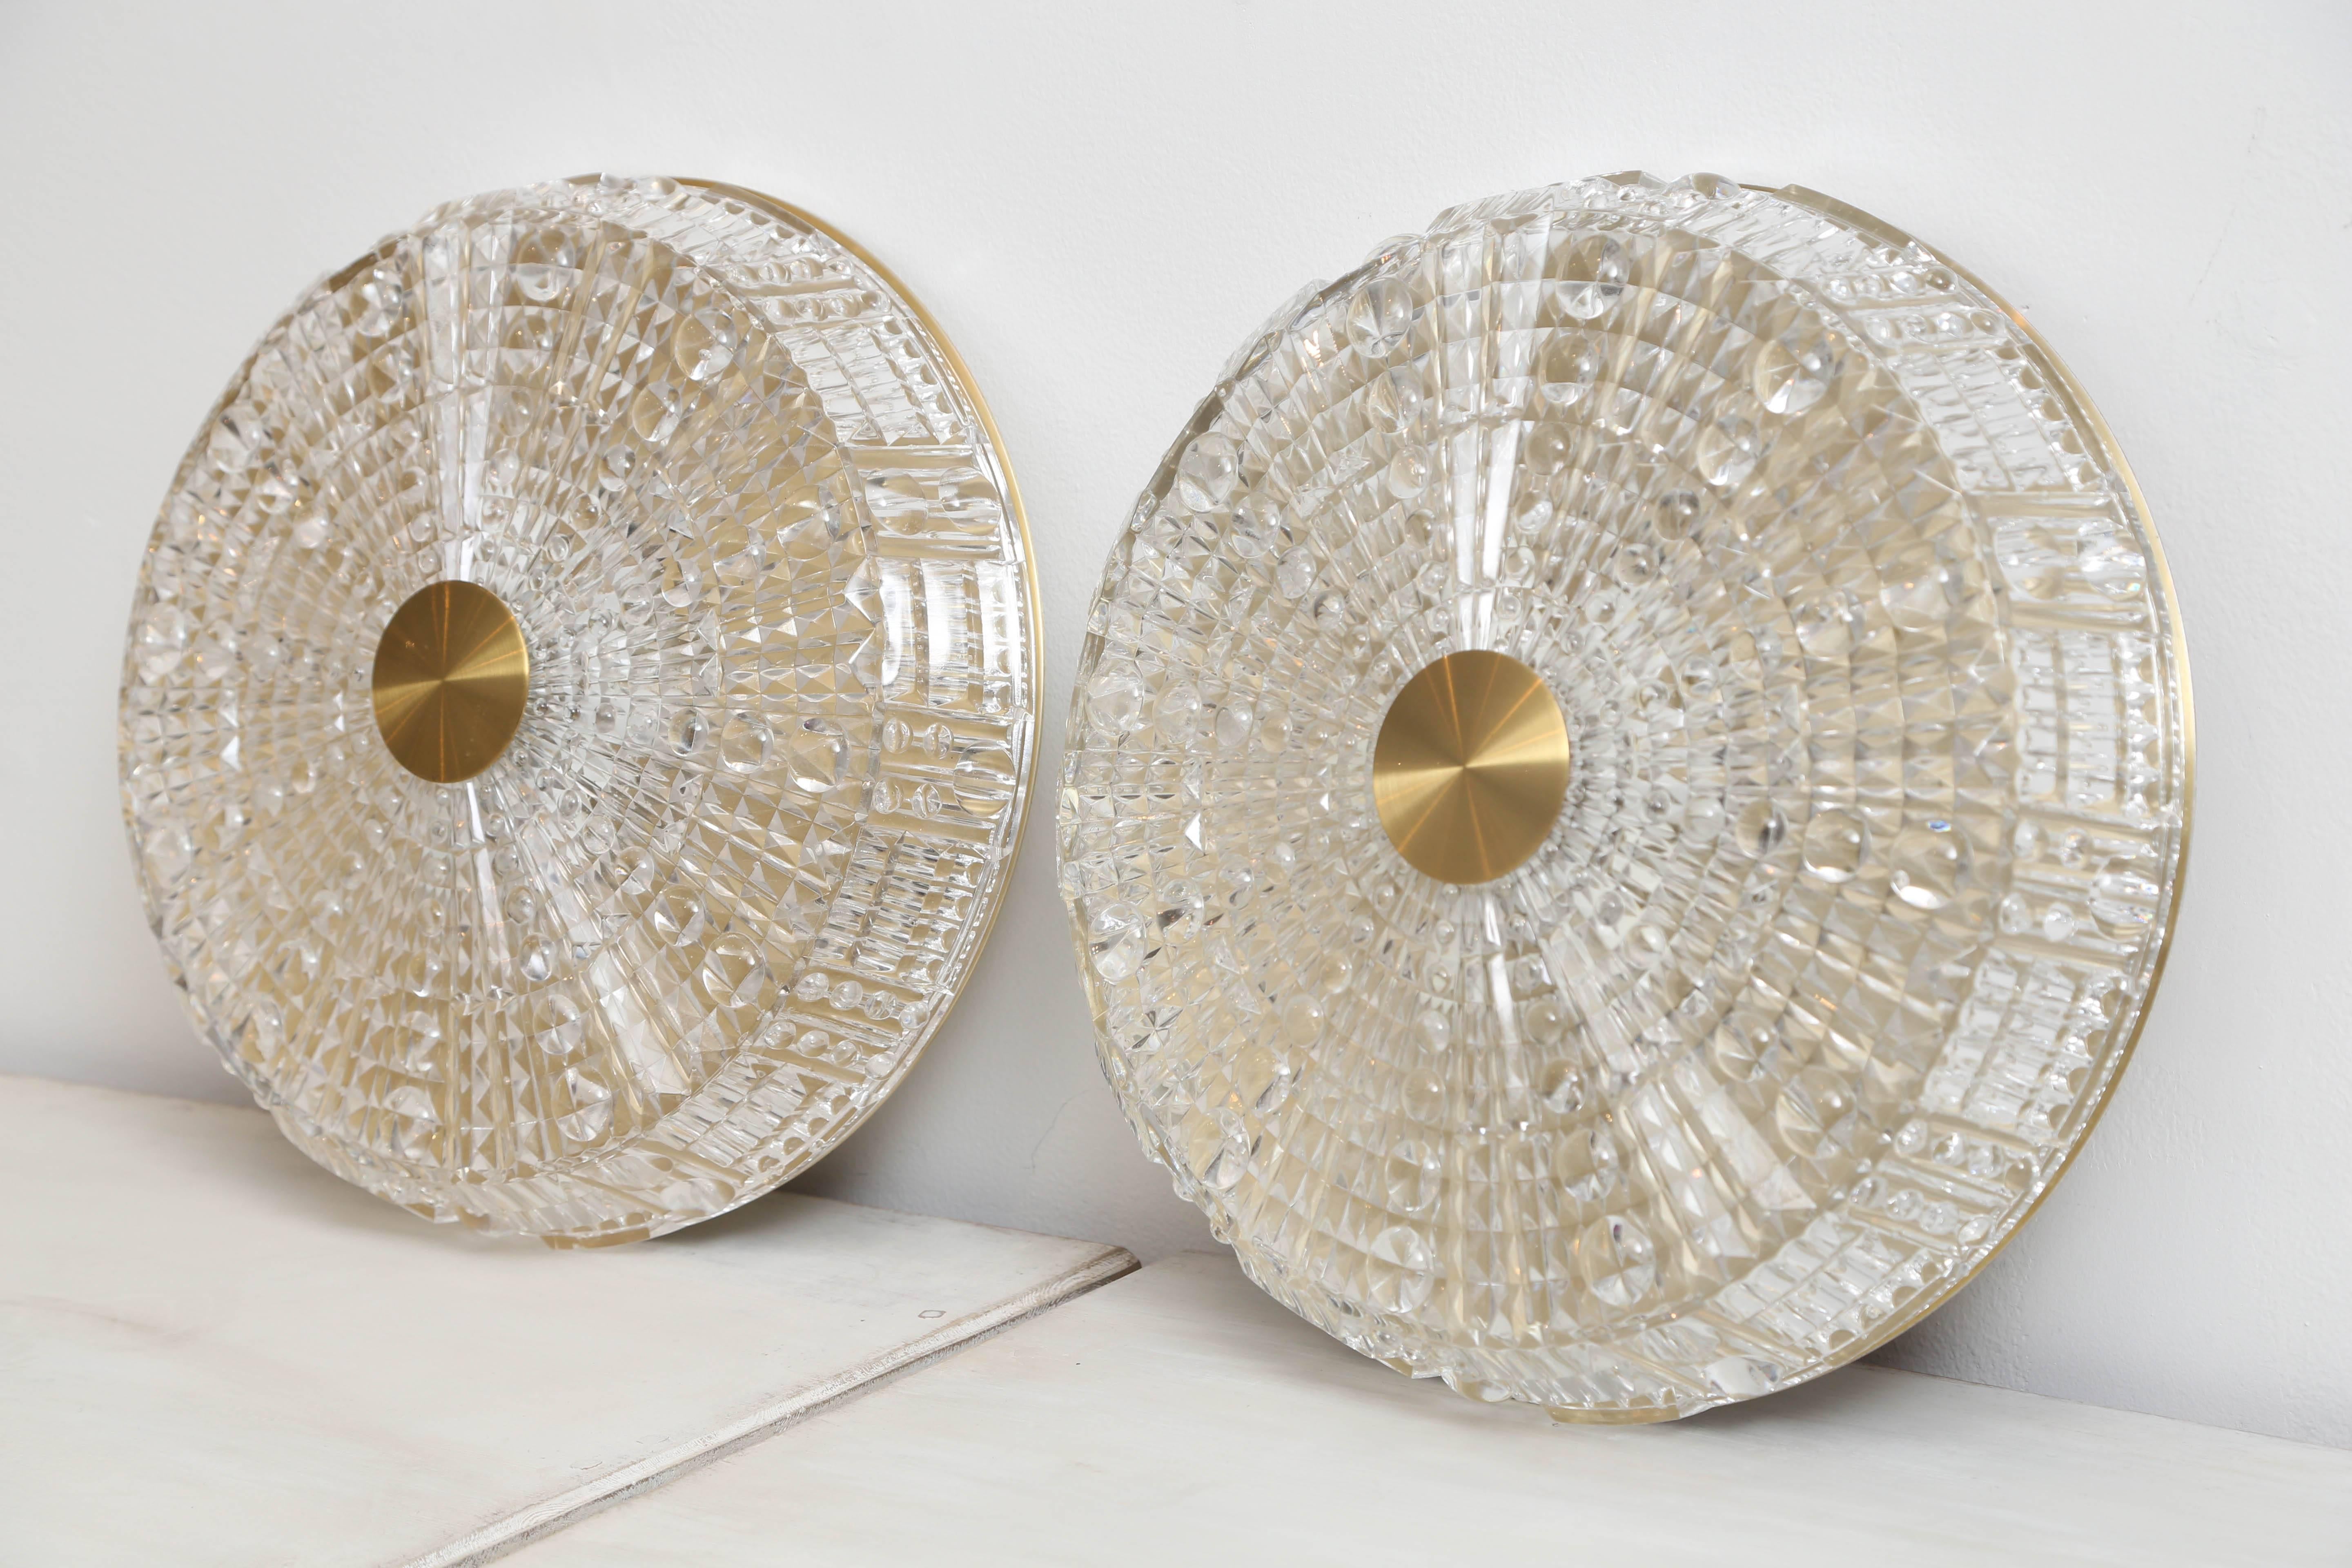 Pair of Orrefors crystal and brass flush mount light fixtures by Carl Fagerlund.
Swedish, 1960s The crystal cover has raised circular pattern and raised diamond design.
Brass and crystal with six sockets each, takes six candelabra base